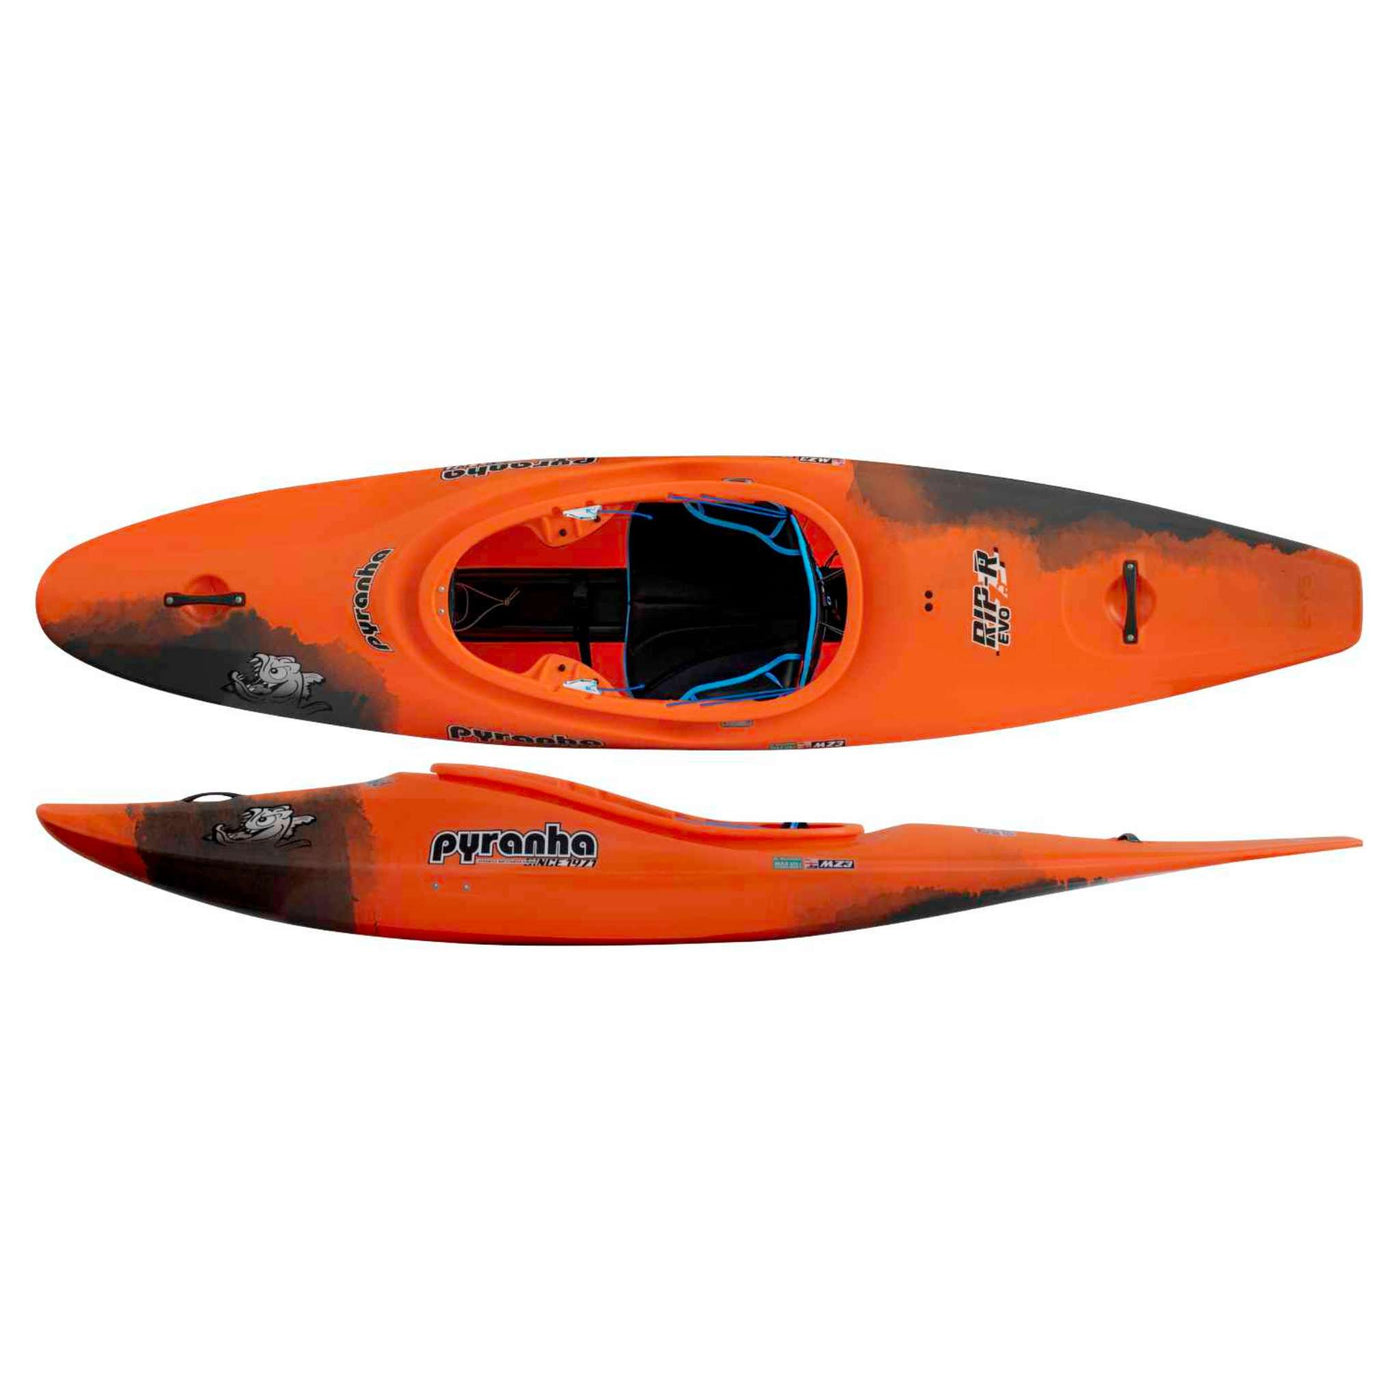 Pyranha-R Evo 2 F | Whitewater Kayak | Further Faster Christchurch NZ #fire-ant